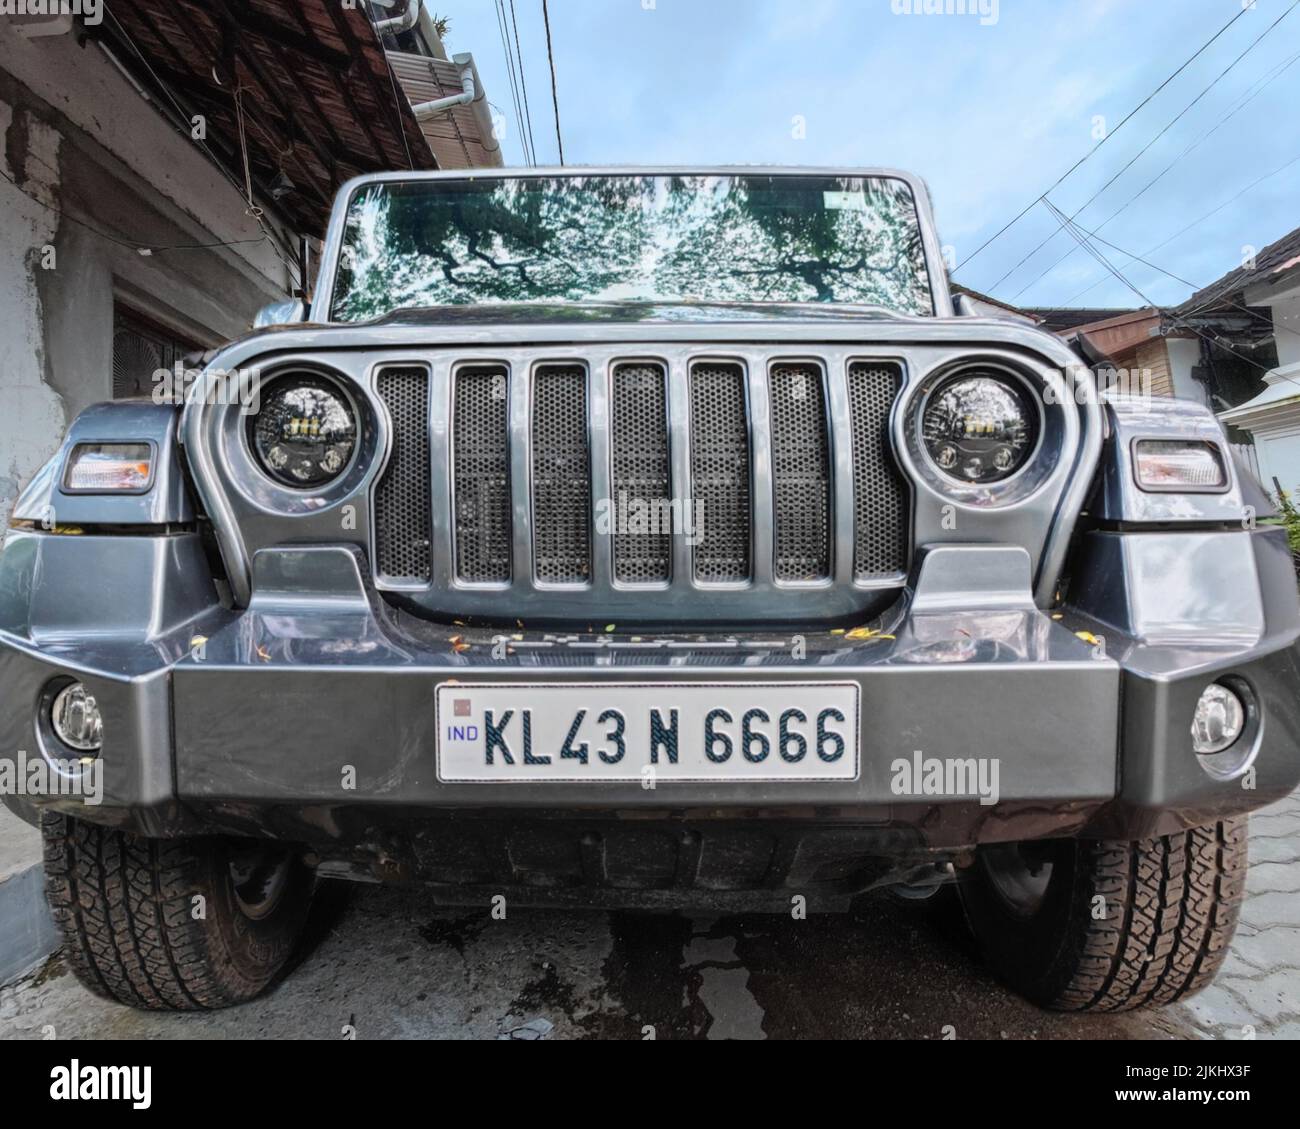 A front view shot of a Mahindra Thar, Sport utility vehicle model against a blue sky Stock Photo